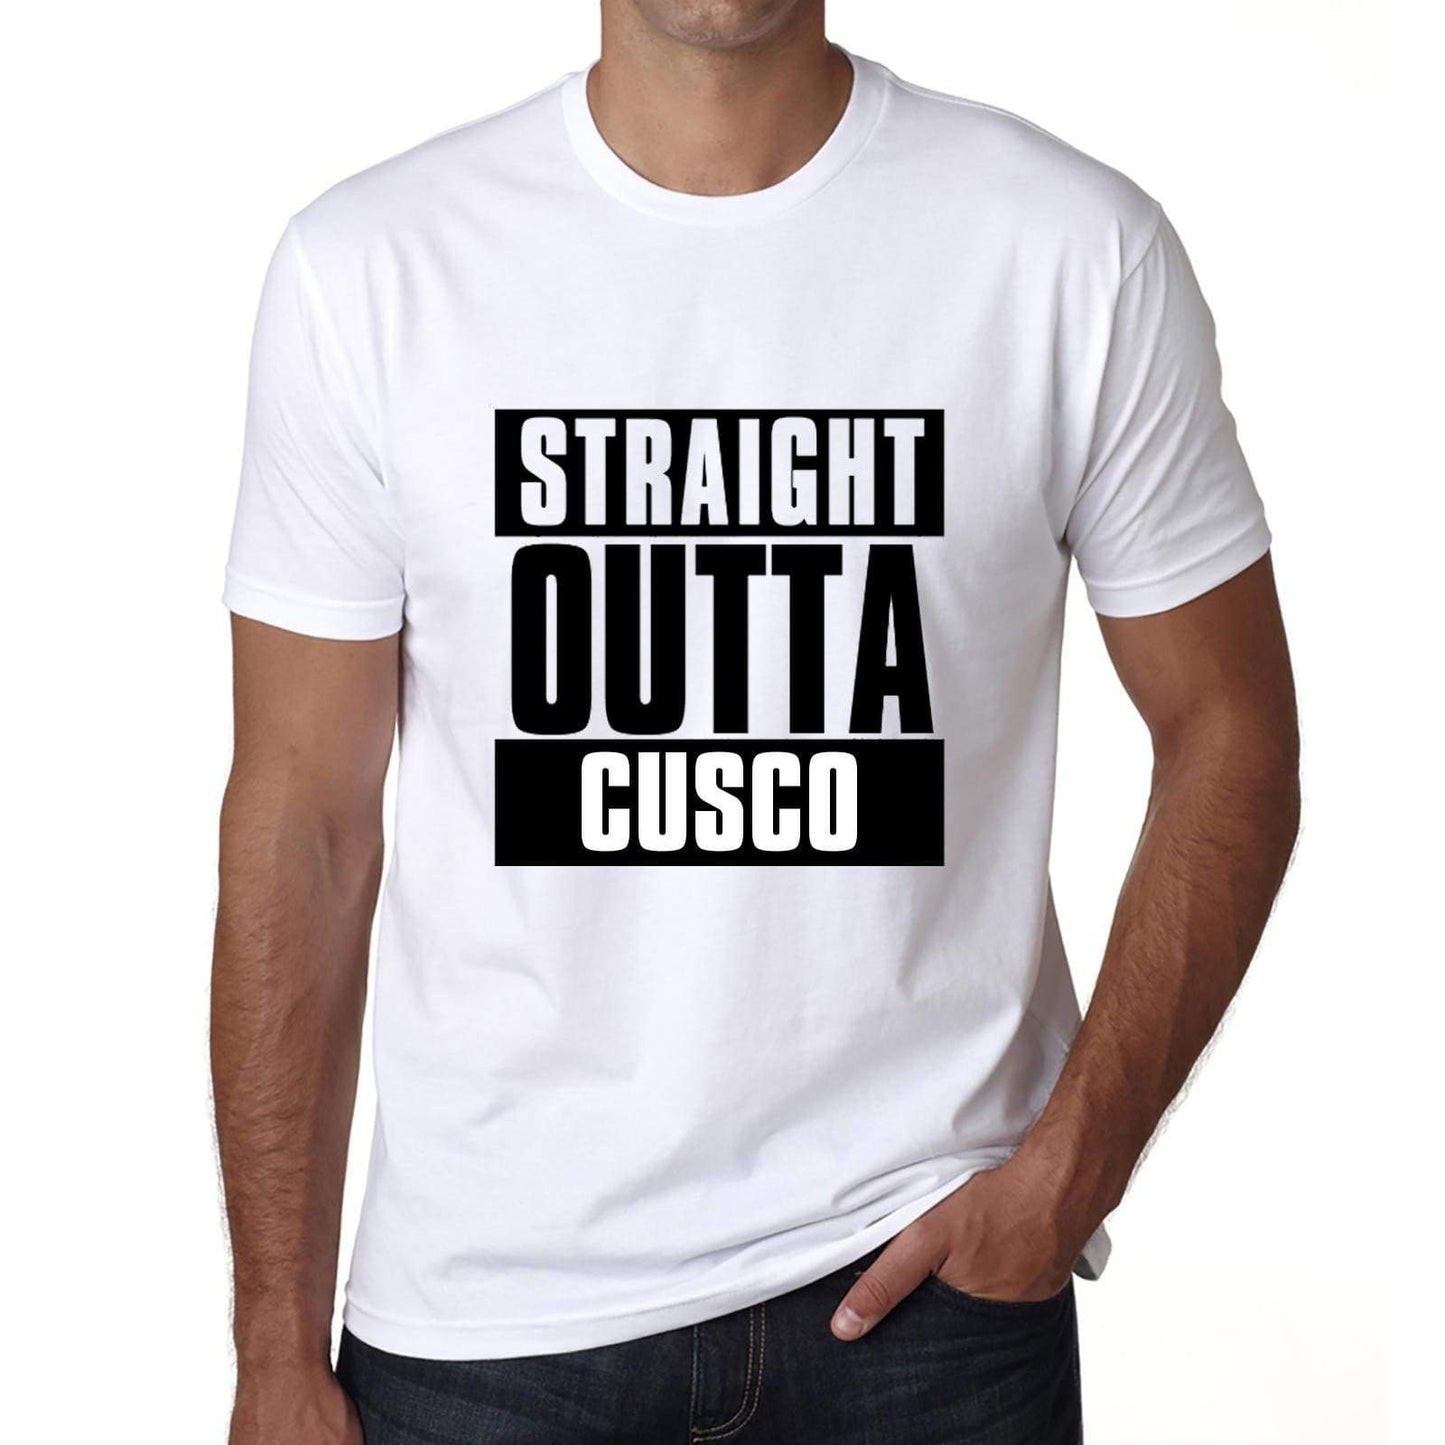 Straight Outta Cusco Mens Short Sleeve Round Neck T-Shirt 00027 - White / S - Casual